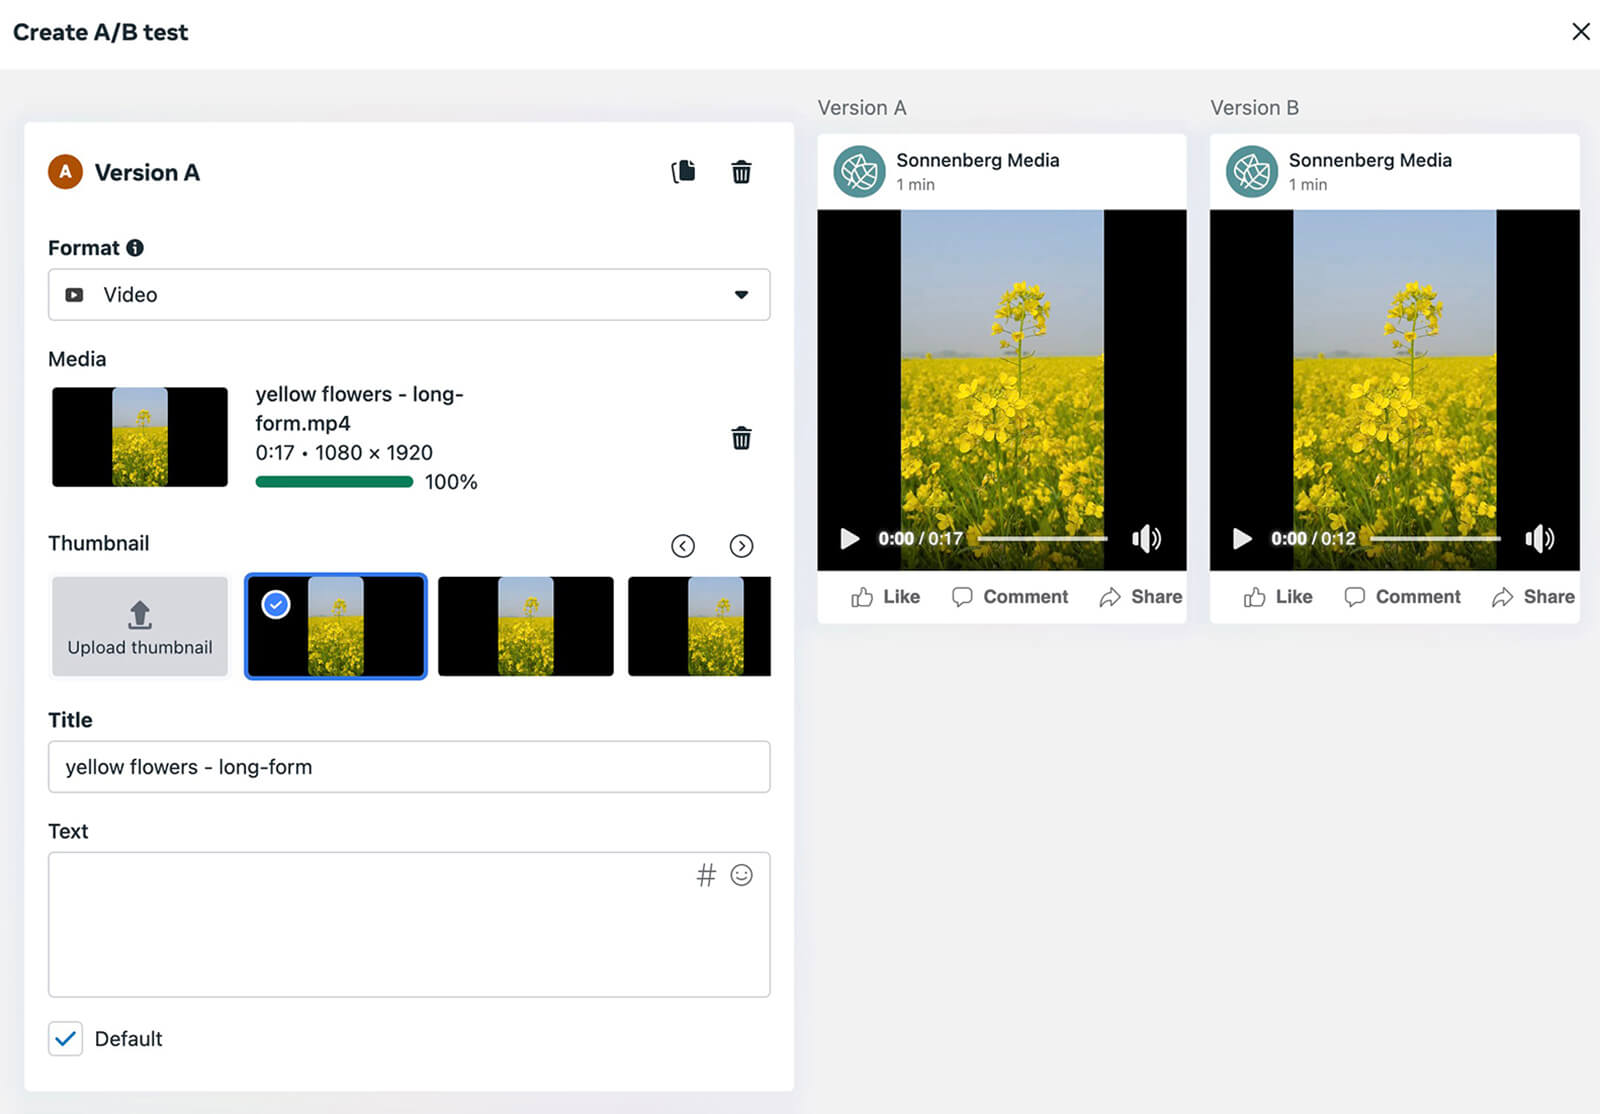 Updates Creator Studio App With More Insights, User Control Options